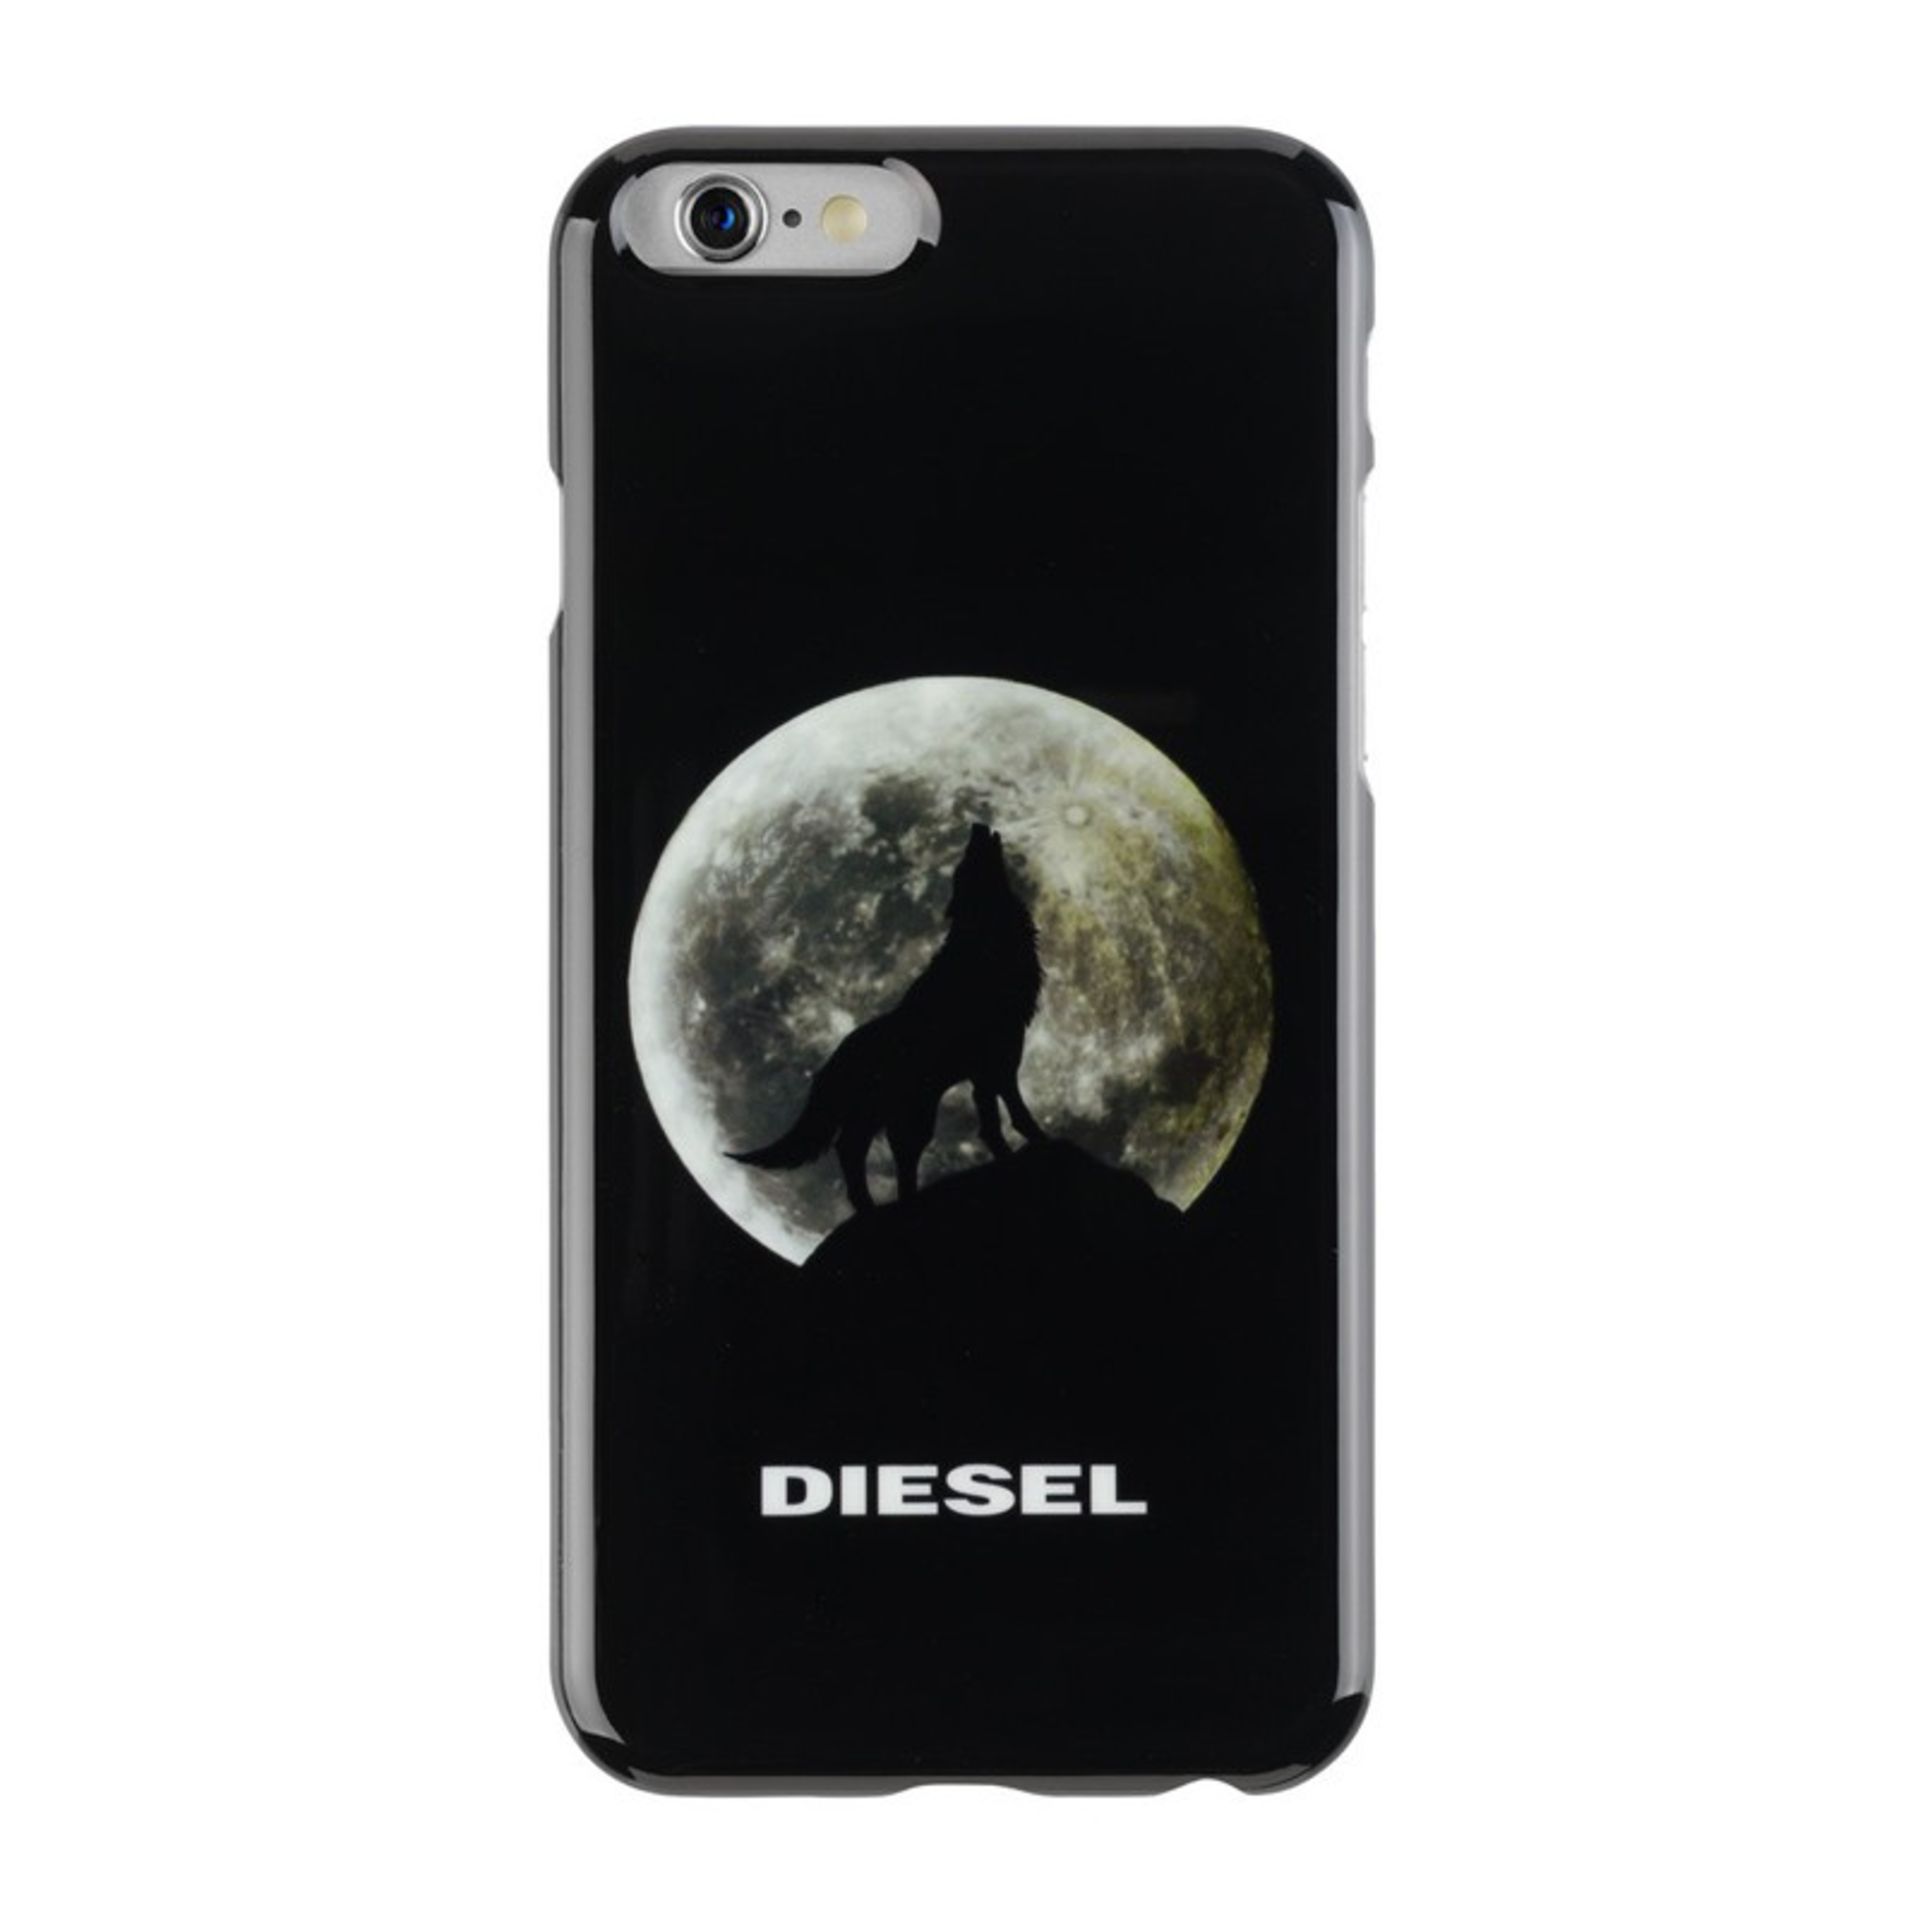 V *TRADE QTY* Brand New Diesel Pluton 6 Hard Snap Case For iPhone 6 ISP Price 19.90 Euros X 4 YOUR